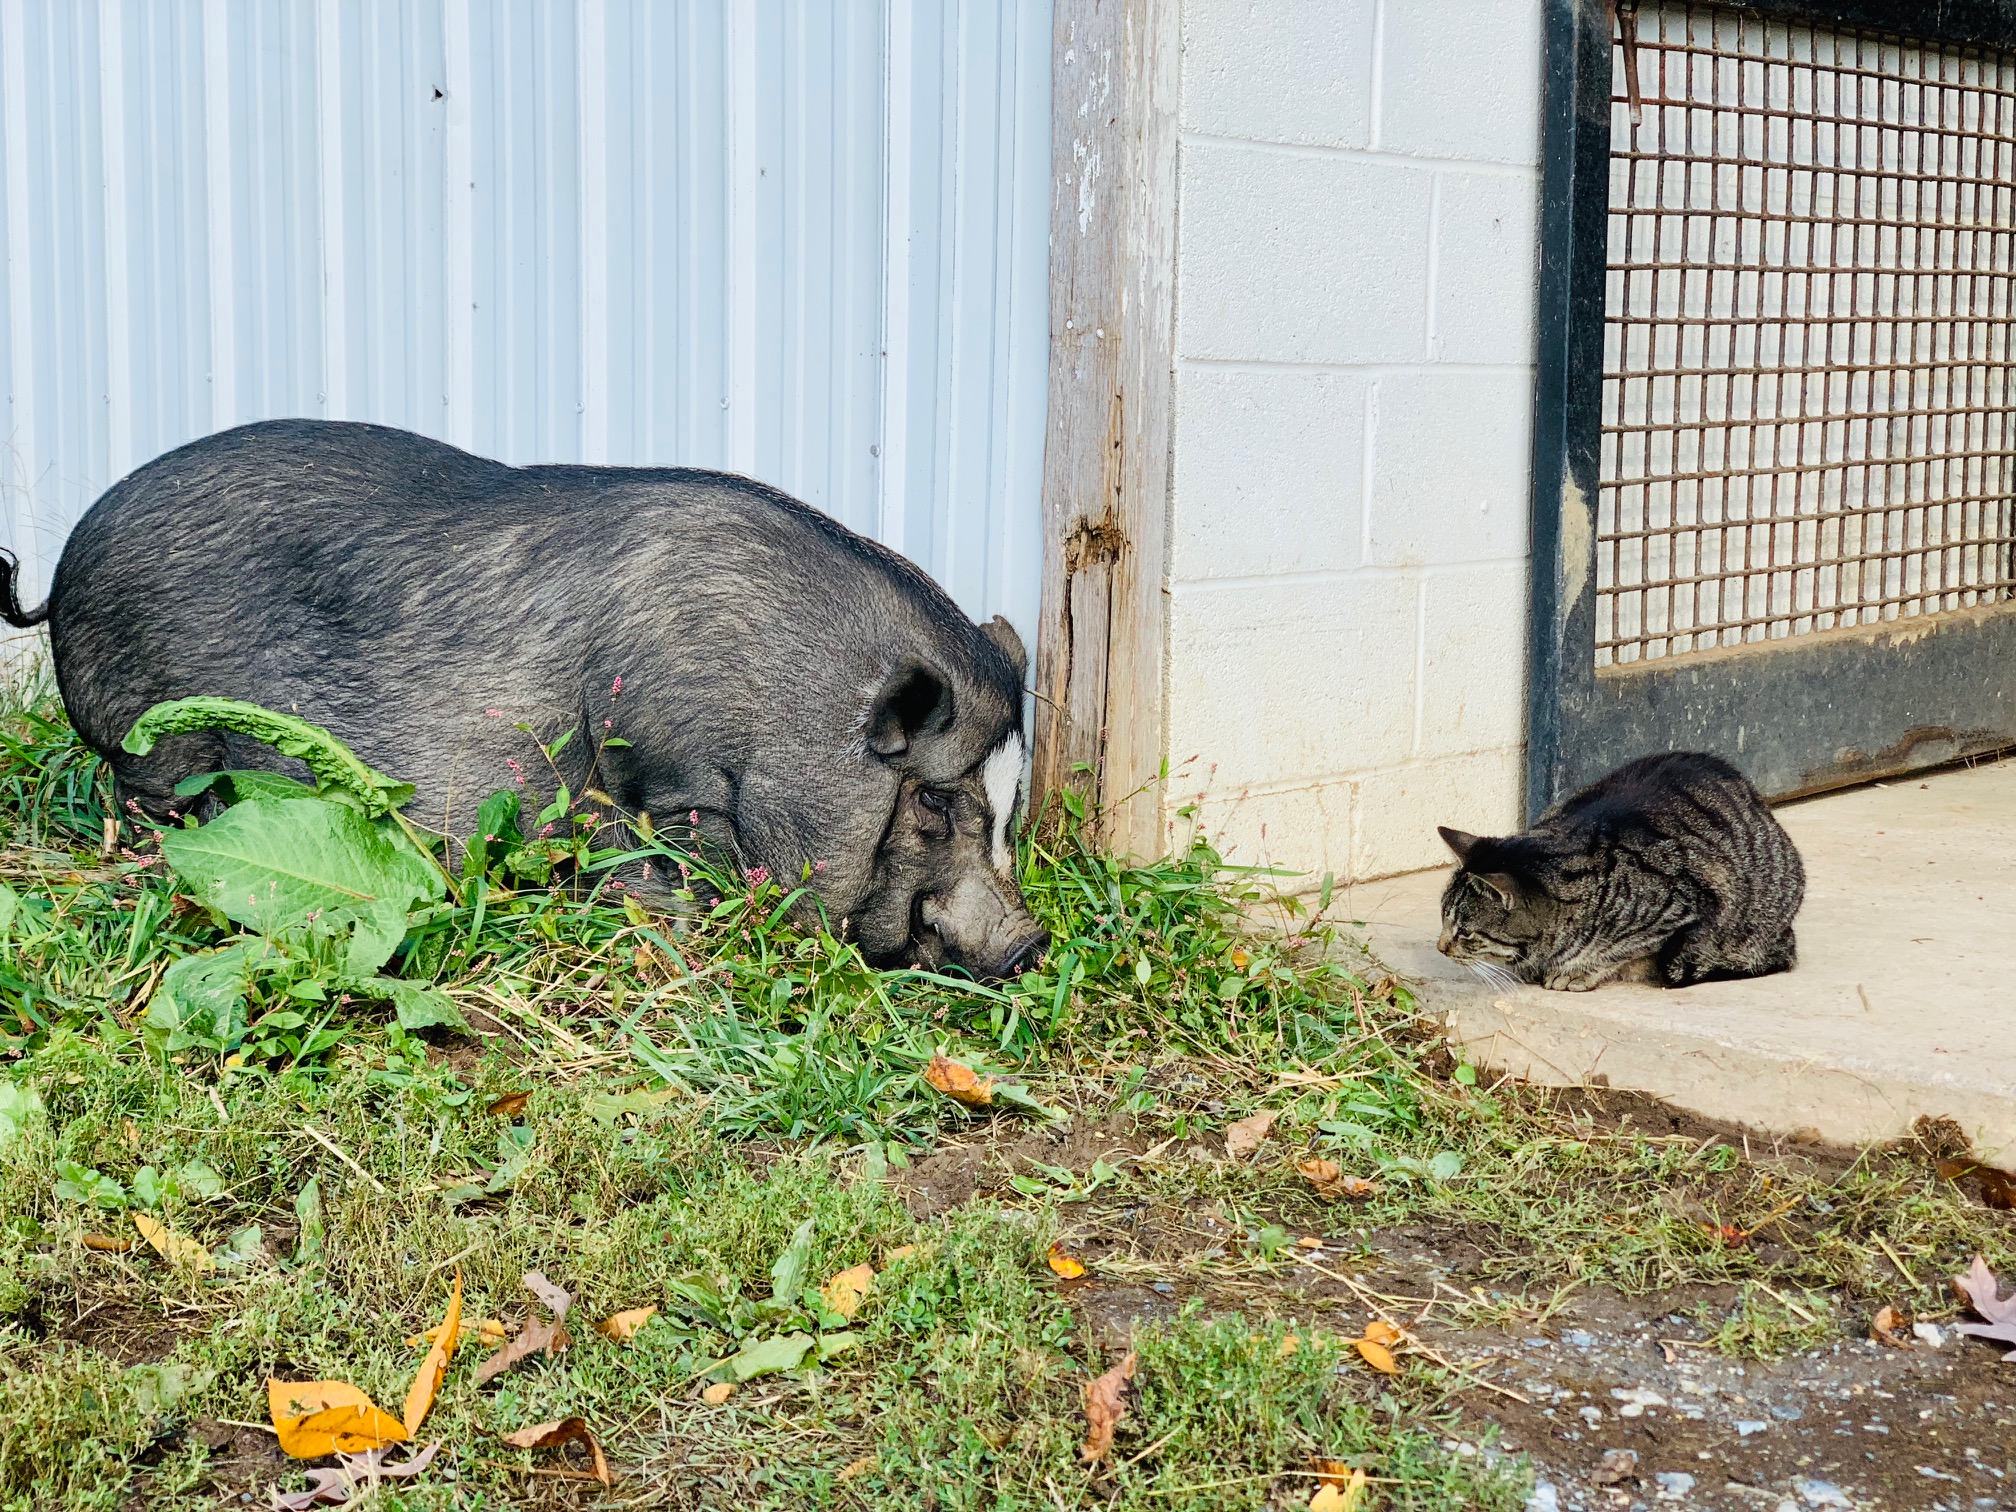 Bugatti isn't sure about Petunia the pig hanging out in her barn.